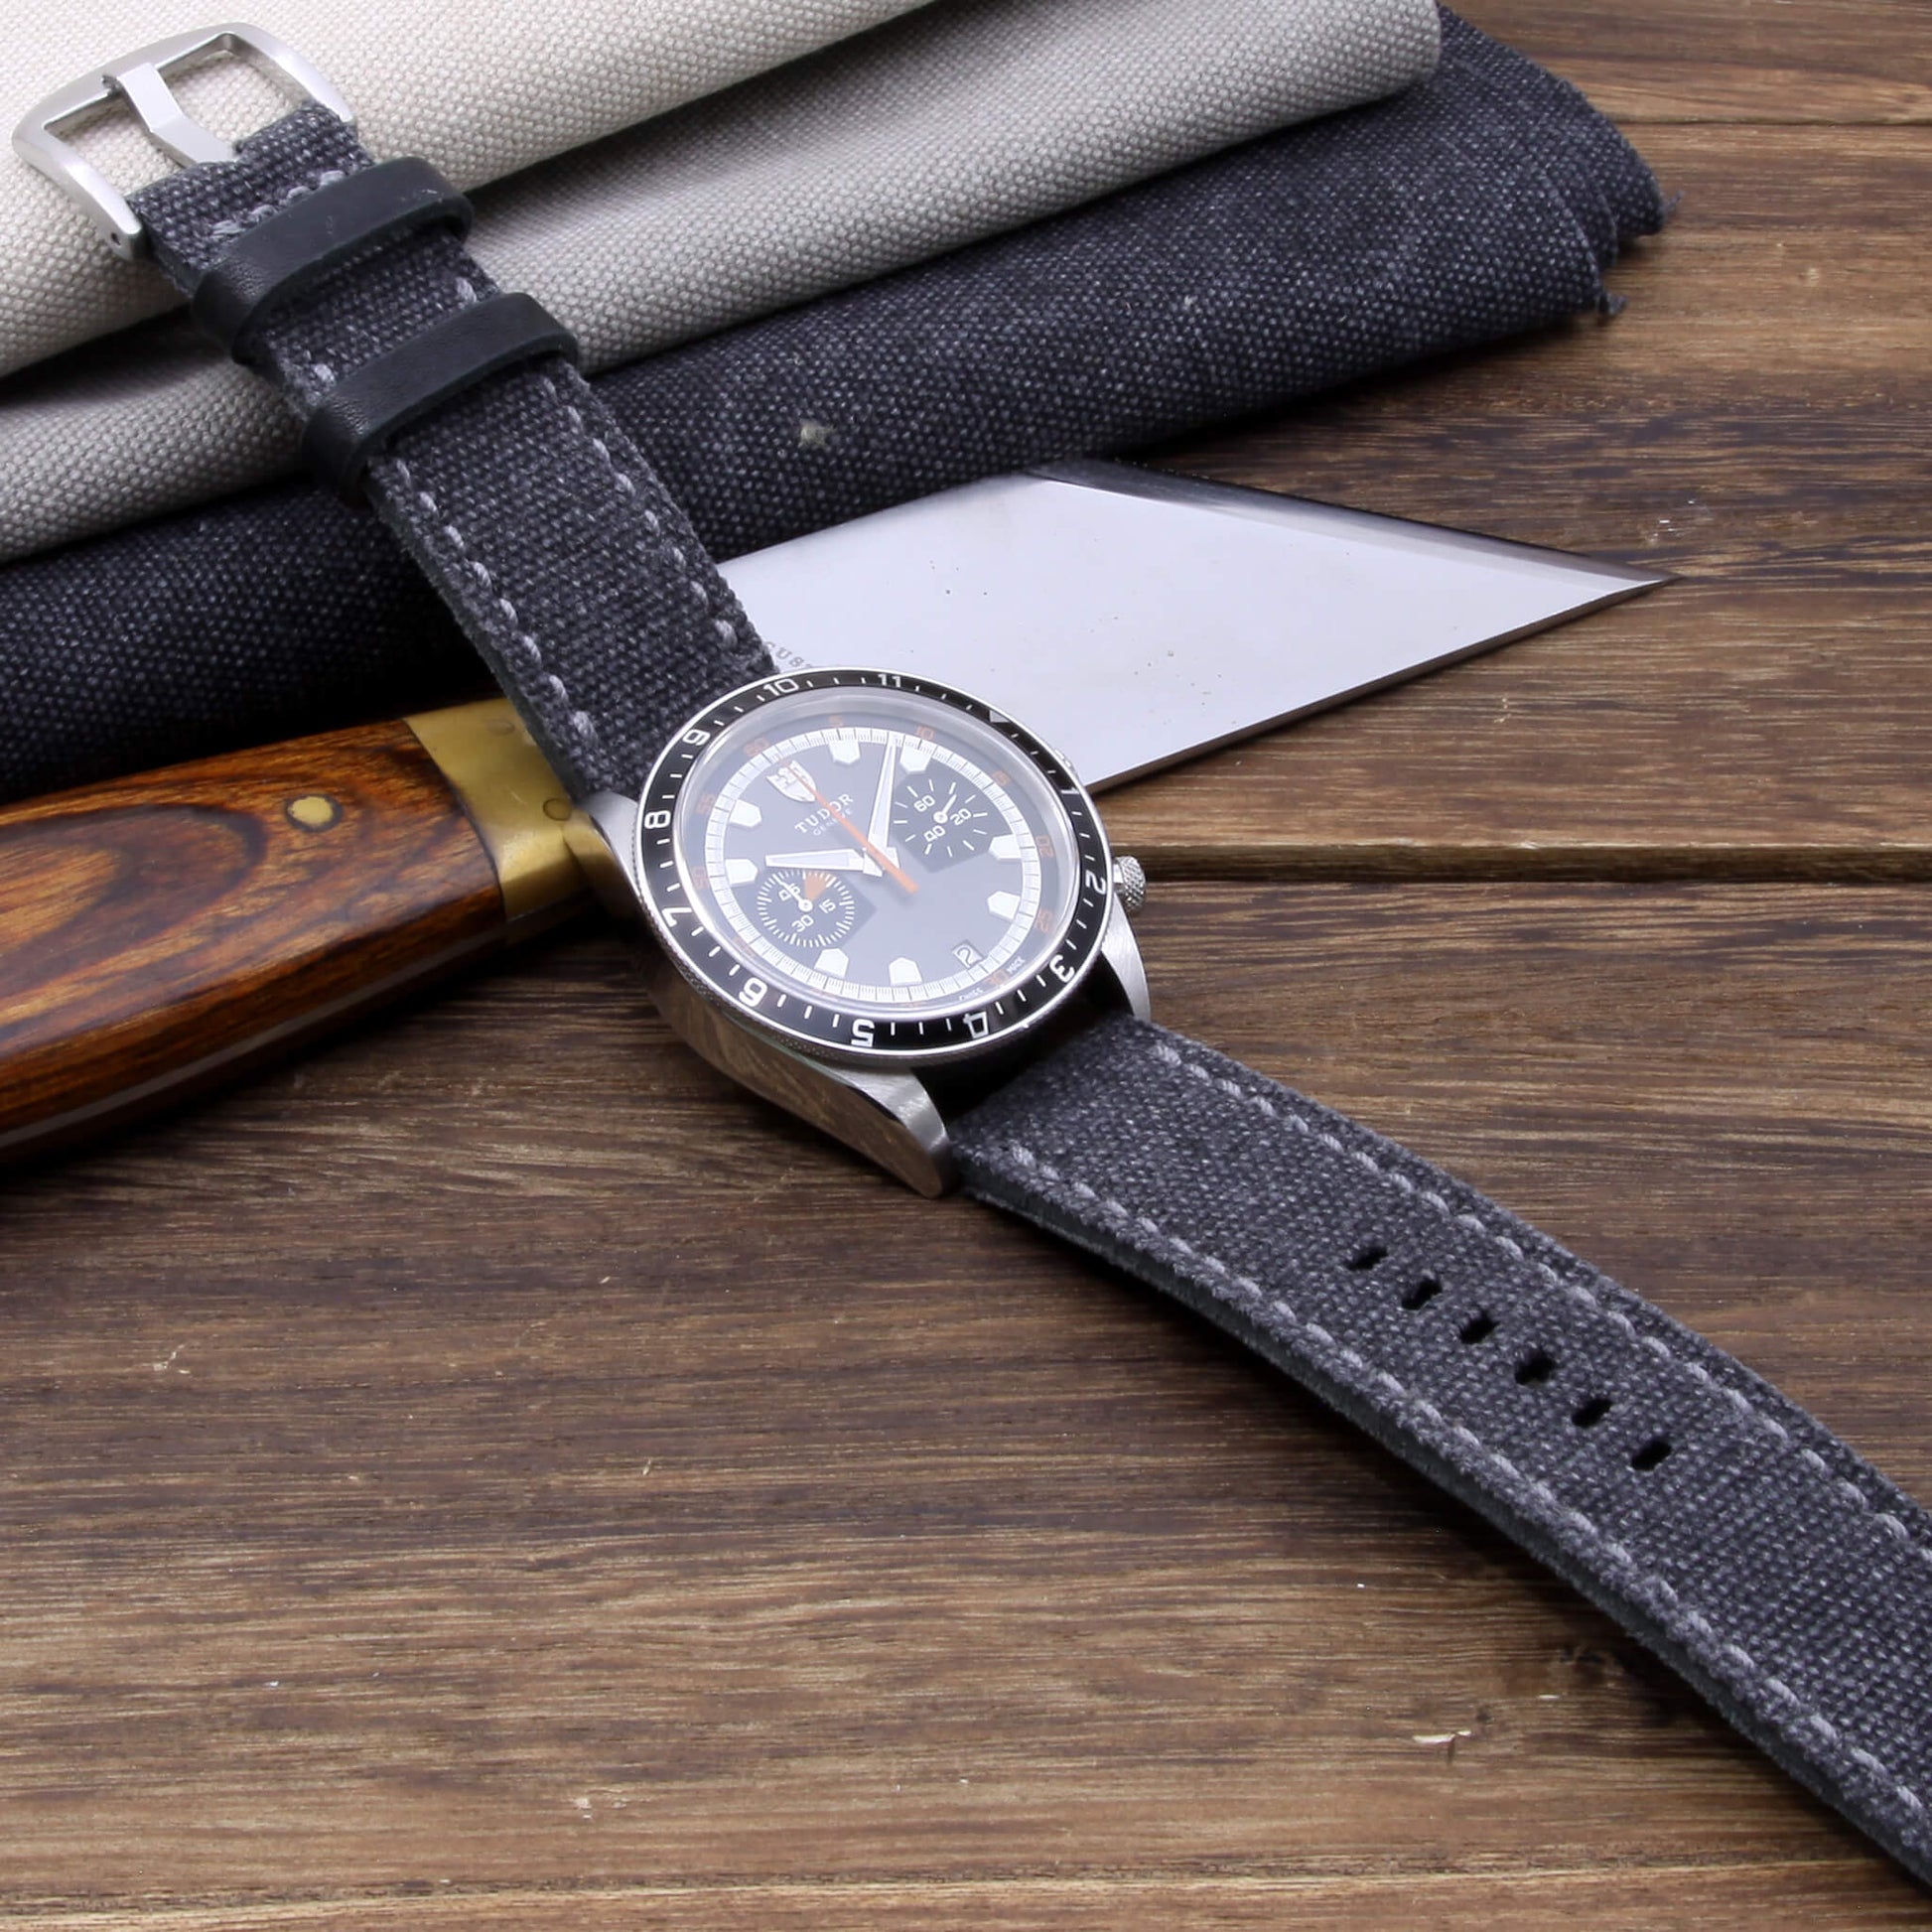 5th View of 2-Piece Full Stitch Leather Watch Strap, made with Stone Washed Black Canvas and Italian veg-tanned leather lining, handcrafted by Cozy Handmade